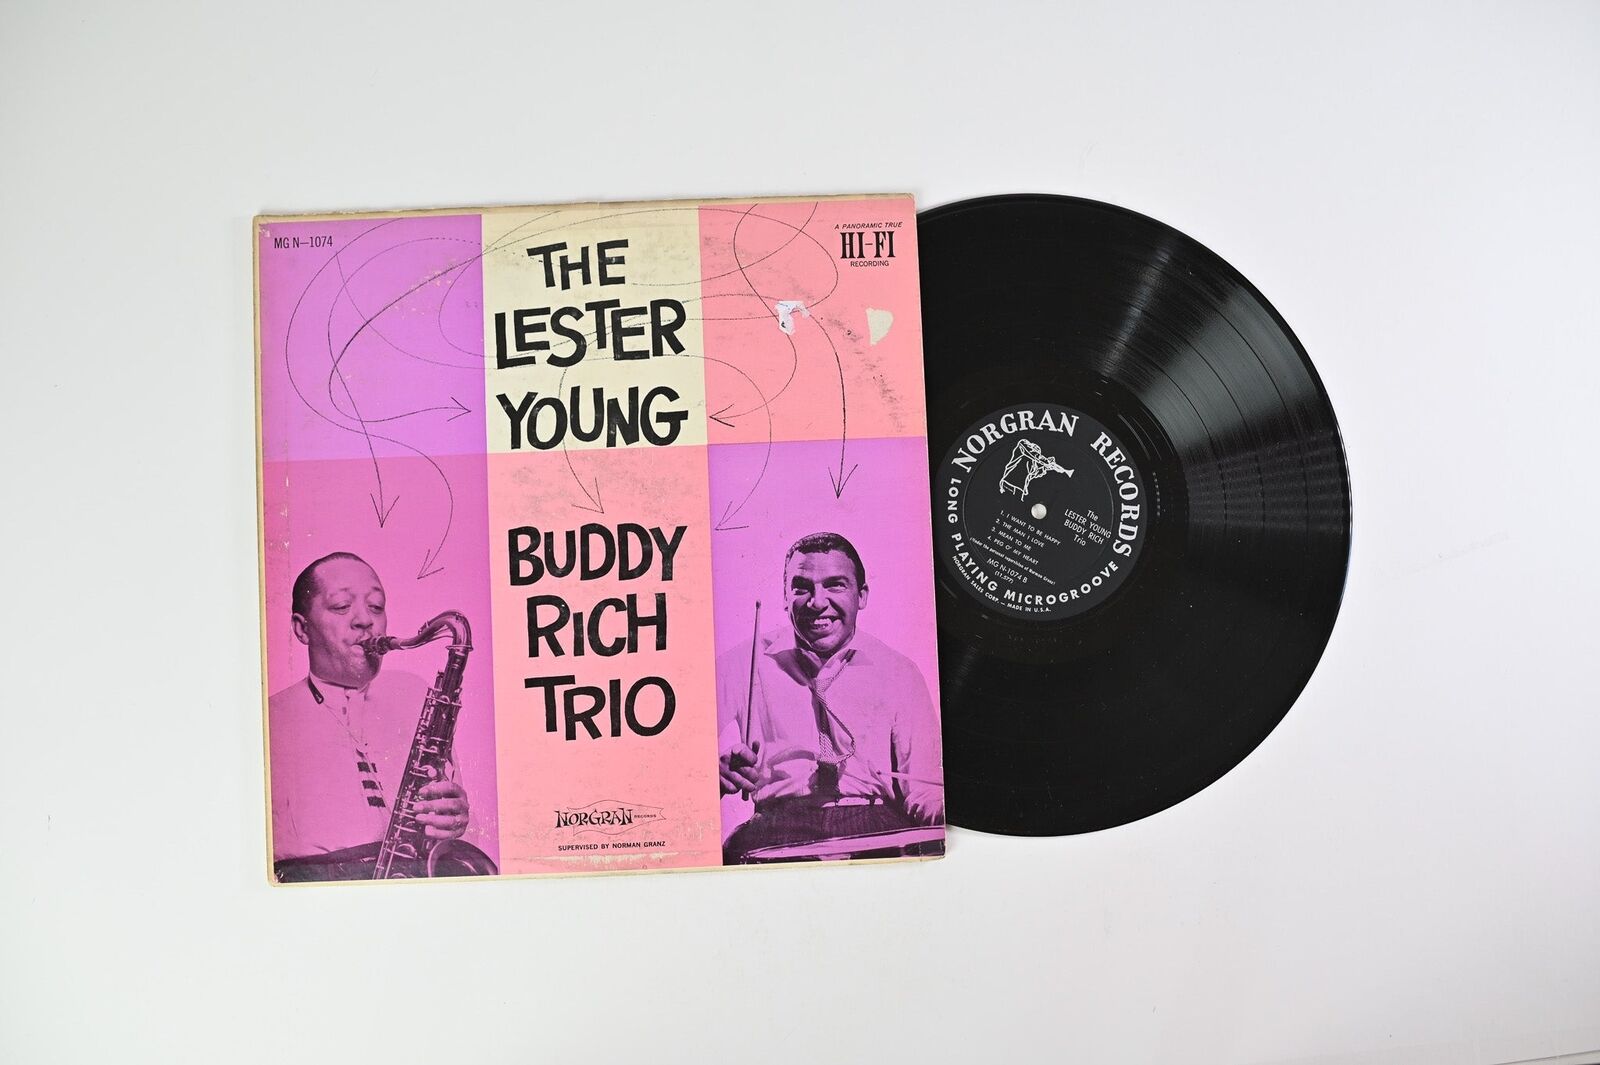 Lester Young-Buddy Rich Trio The Lester Young Buddy Rich Trio on Norgran Records